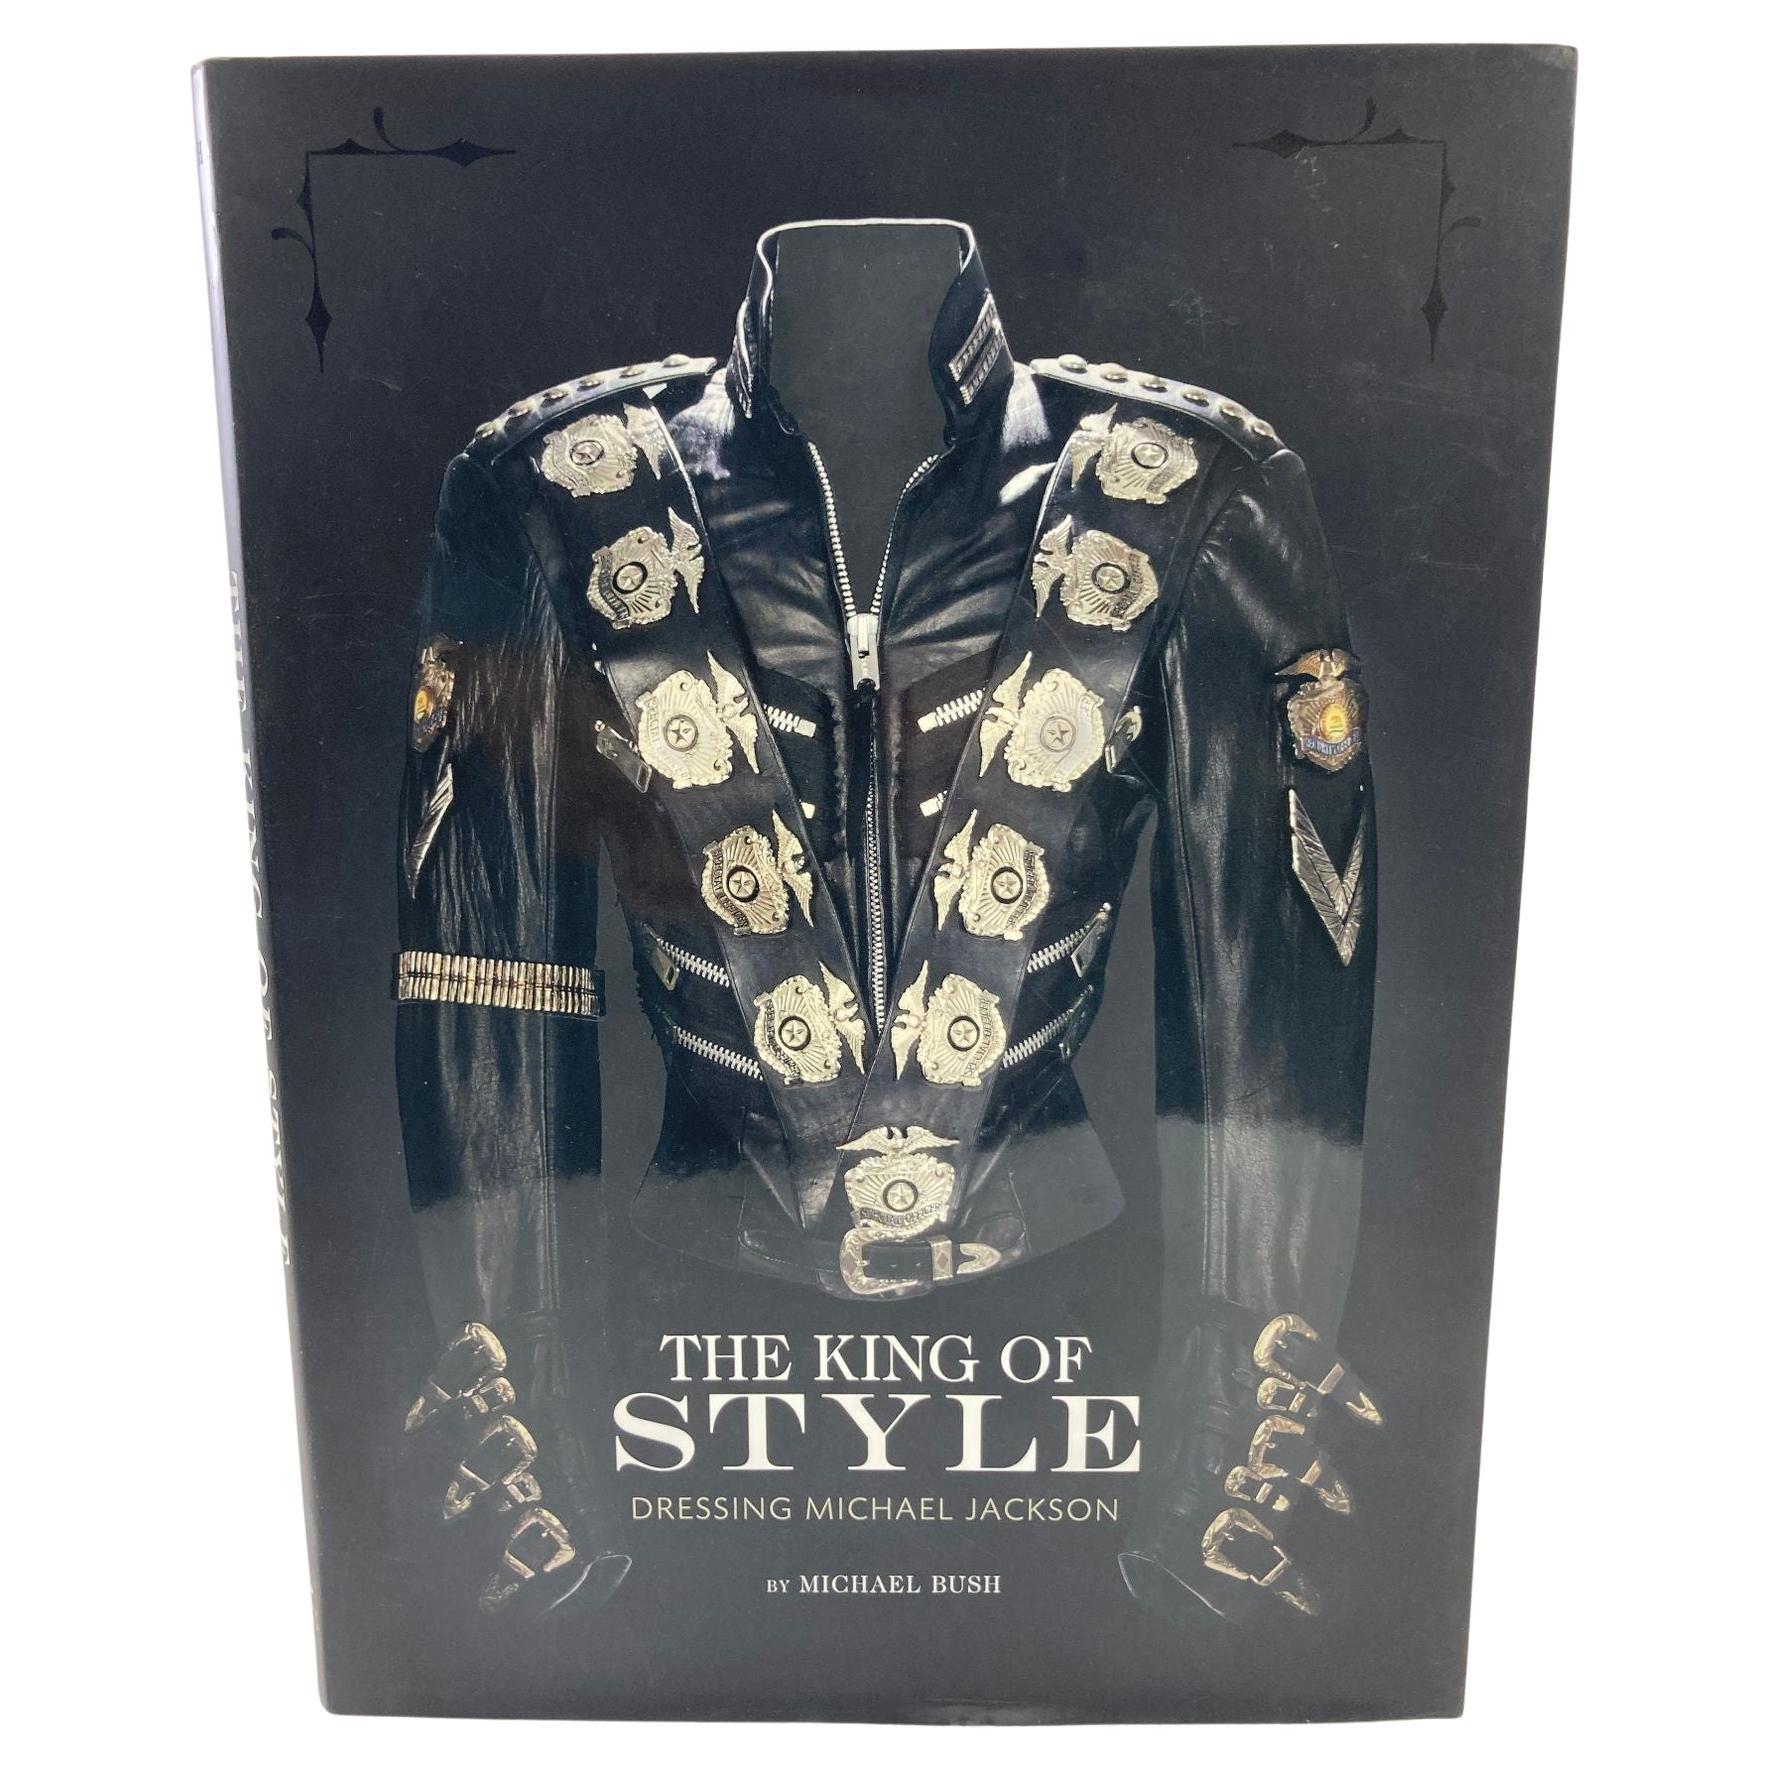 King of Style: Dressing Michael Jackson by Michael Bush Hardcover Book